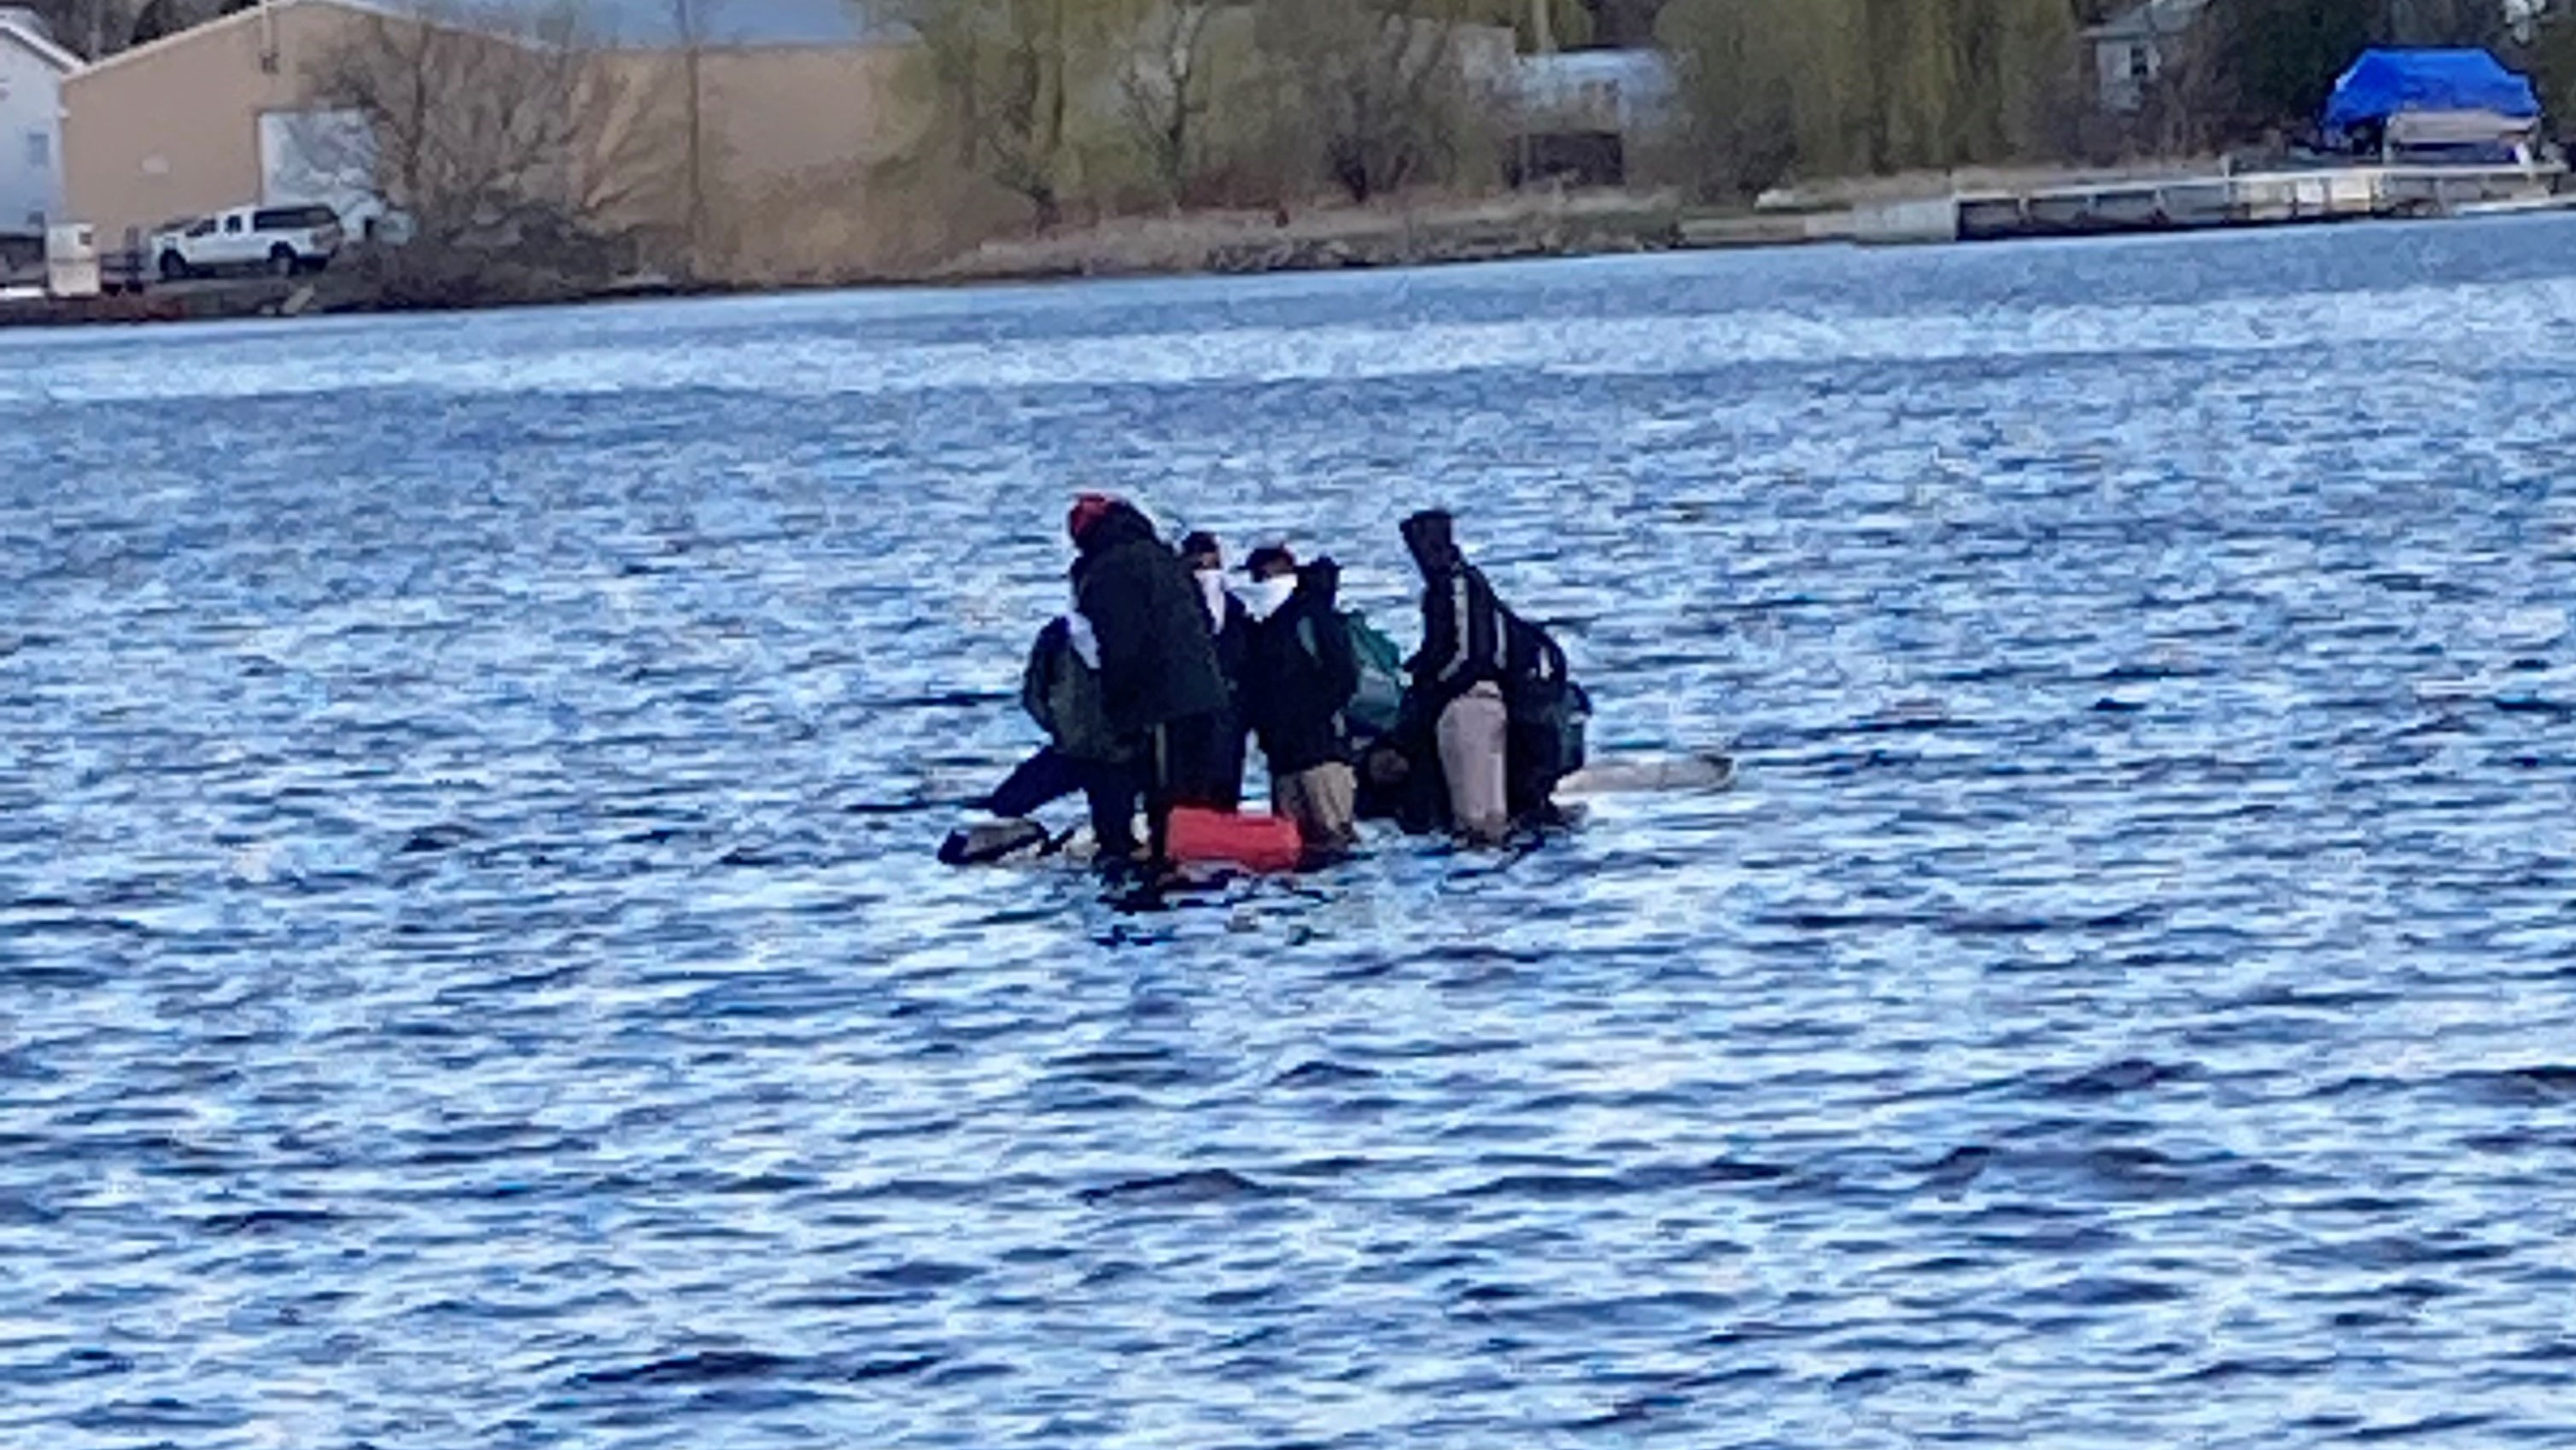 A close up of a boat with 7 people onboard, sinking. 